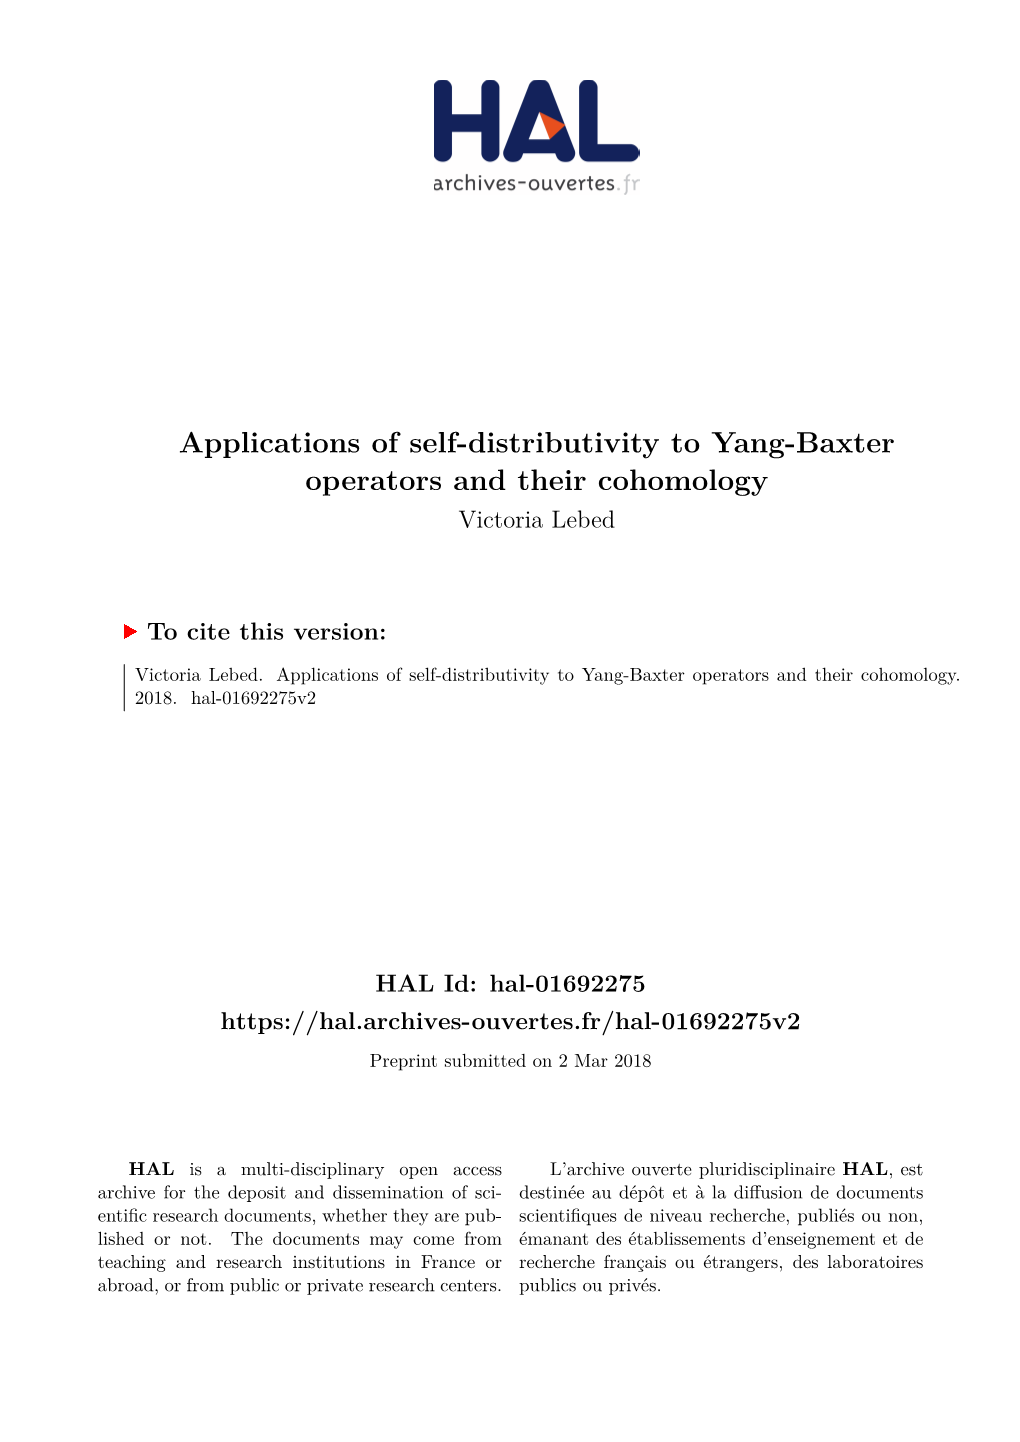 Applications of Self-Distributivity to Yang-Baxter Operators and Their Cohomology Victoria Lebed